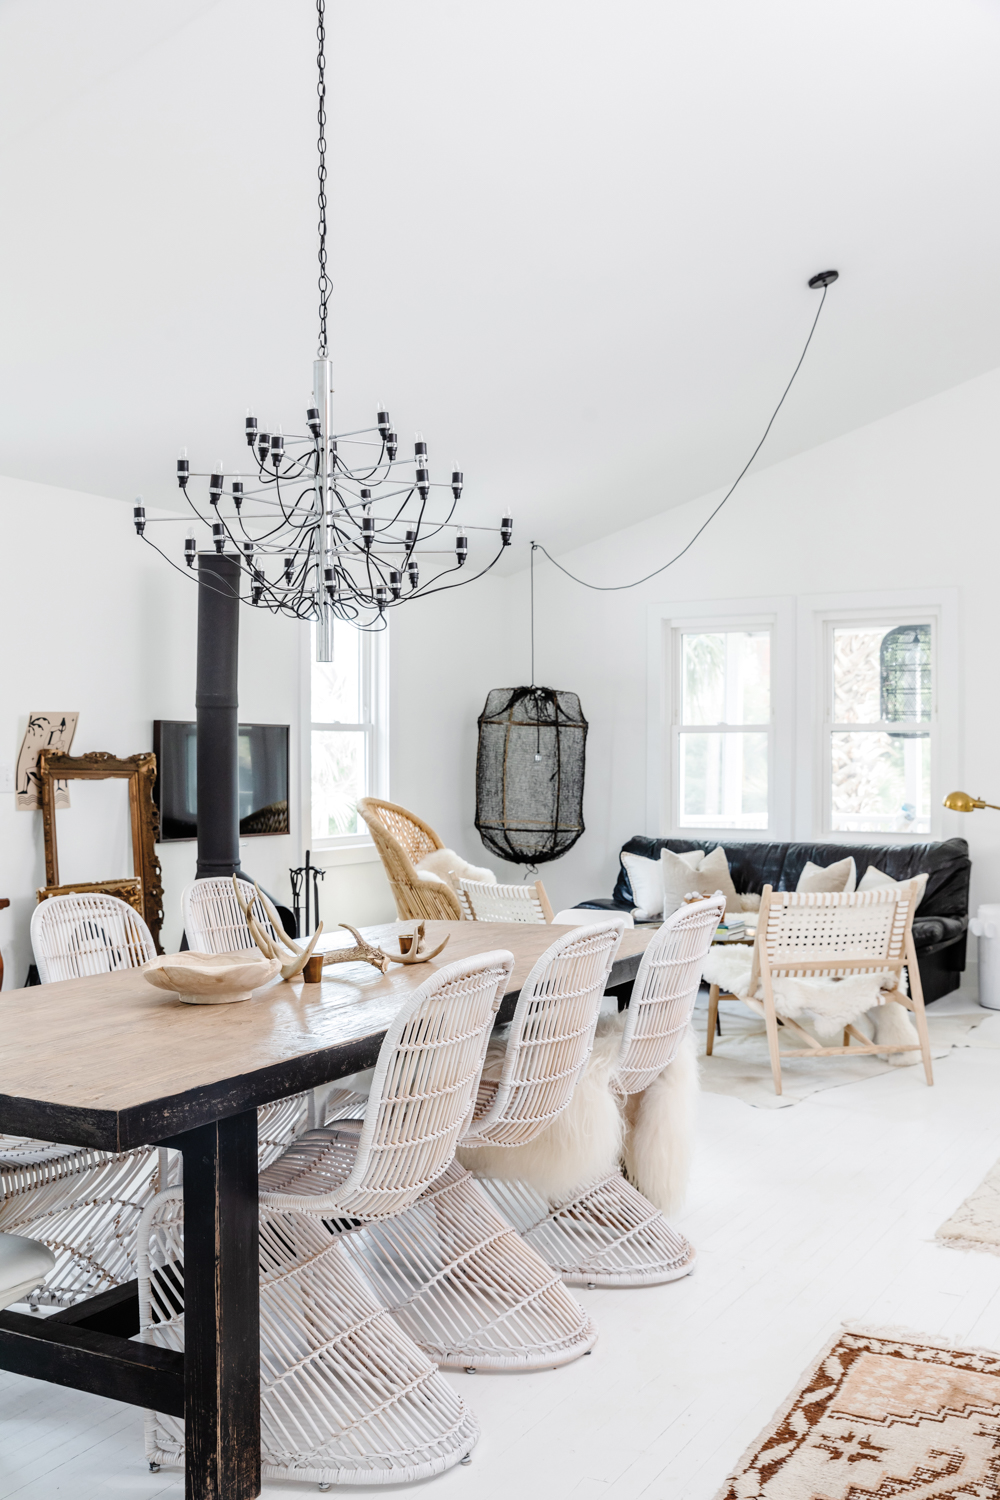 All-white dining room with a black chandelier above rectangular table with white wicker chairs.